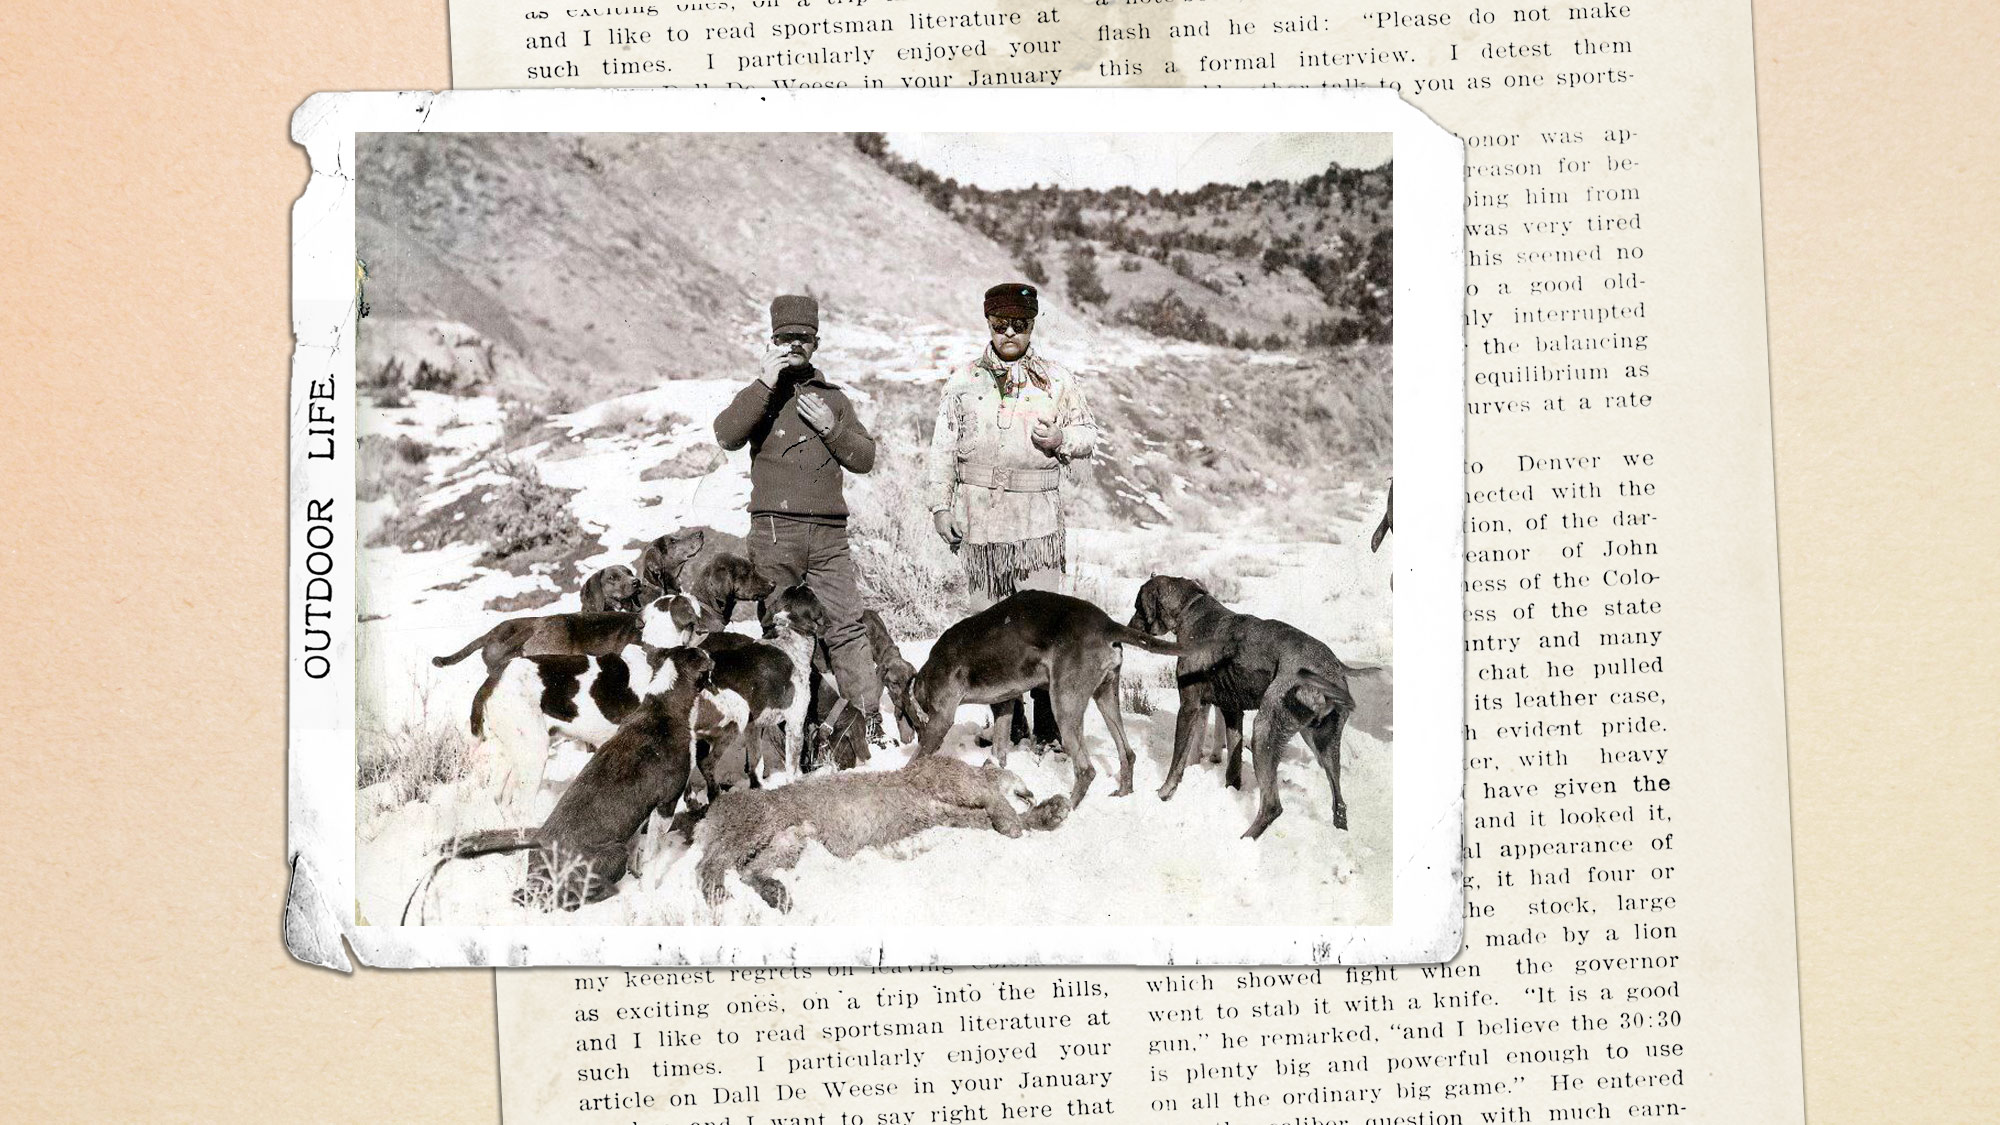 Our Editor-in-Chief Interviews Teddy Roosevelt After His Mountain Lion Hunt, From the Archives